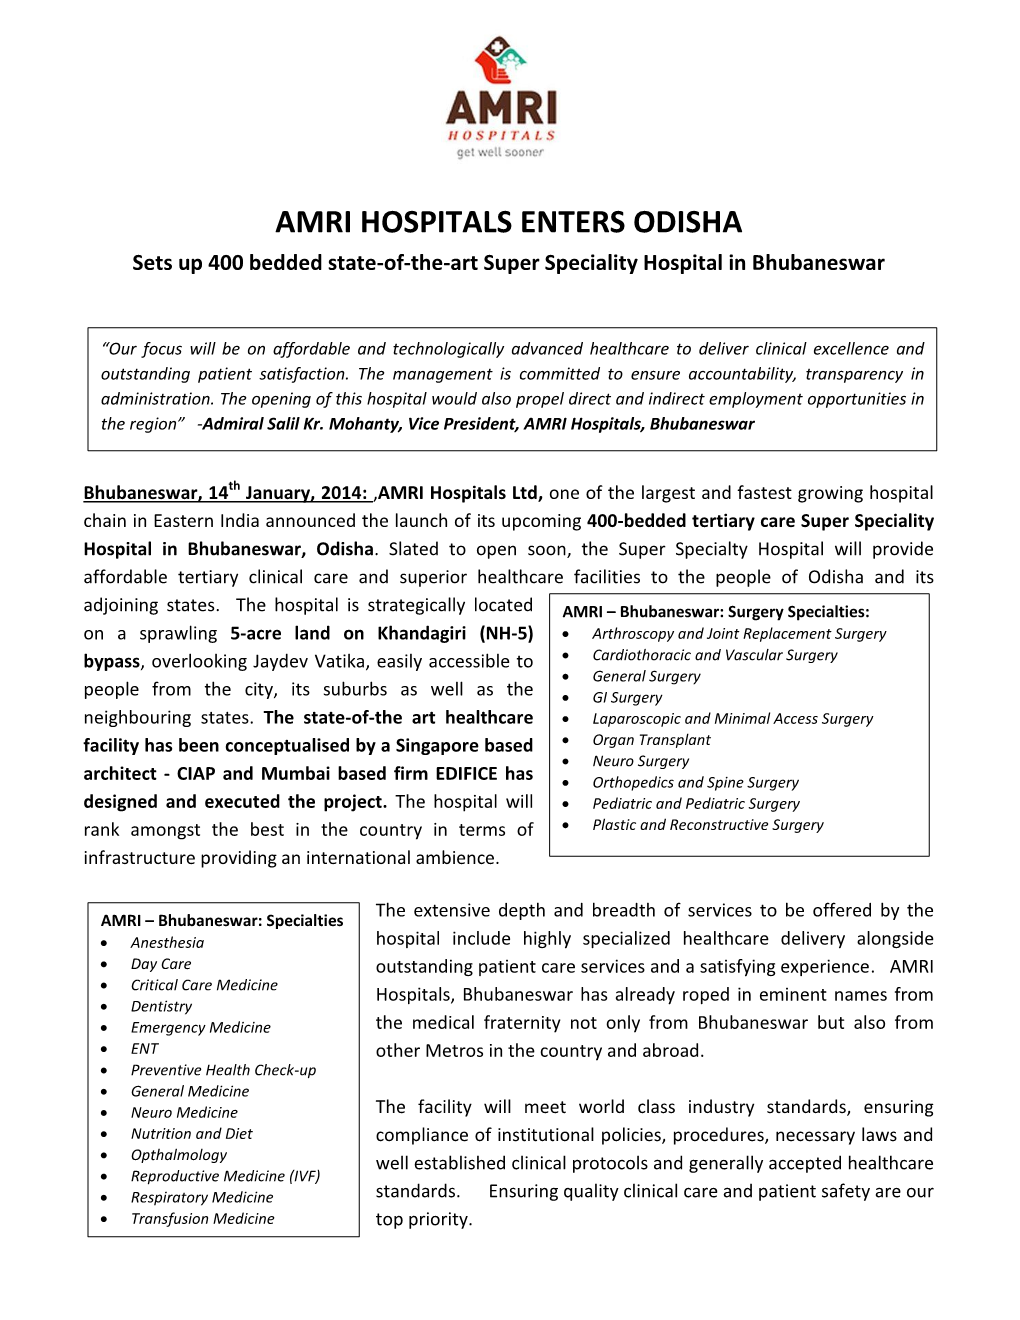 AMRI HOSPITALS ENTERS ODISHA Sets up 400 Bedded State-Of-The-Art Super Speciality Hospital in Bhubaneswar